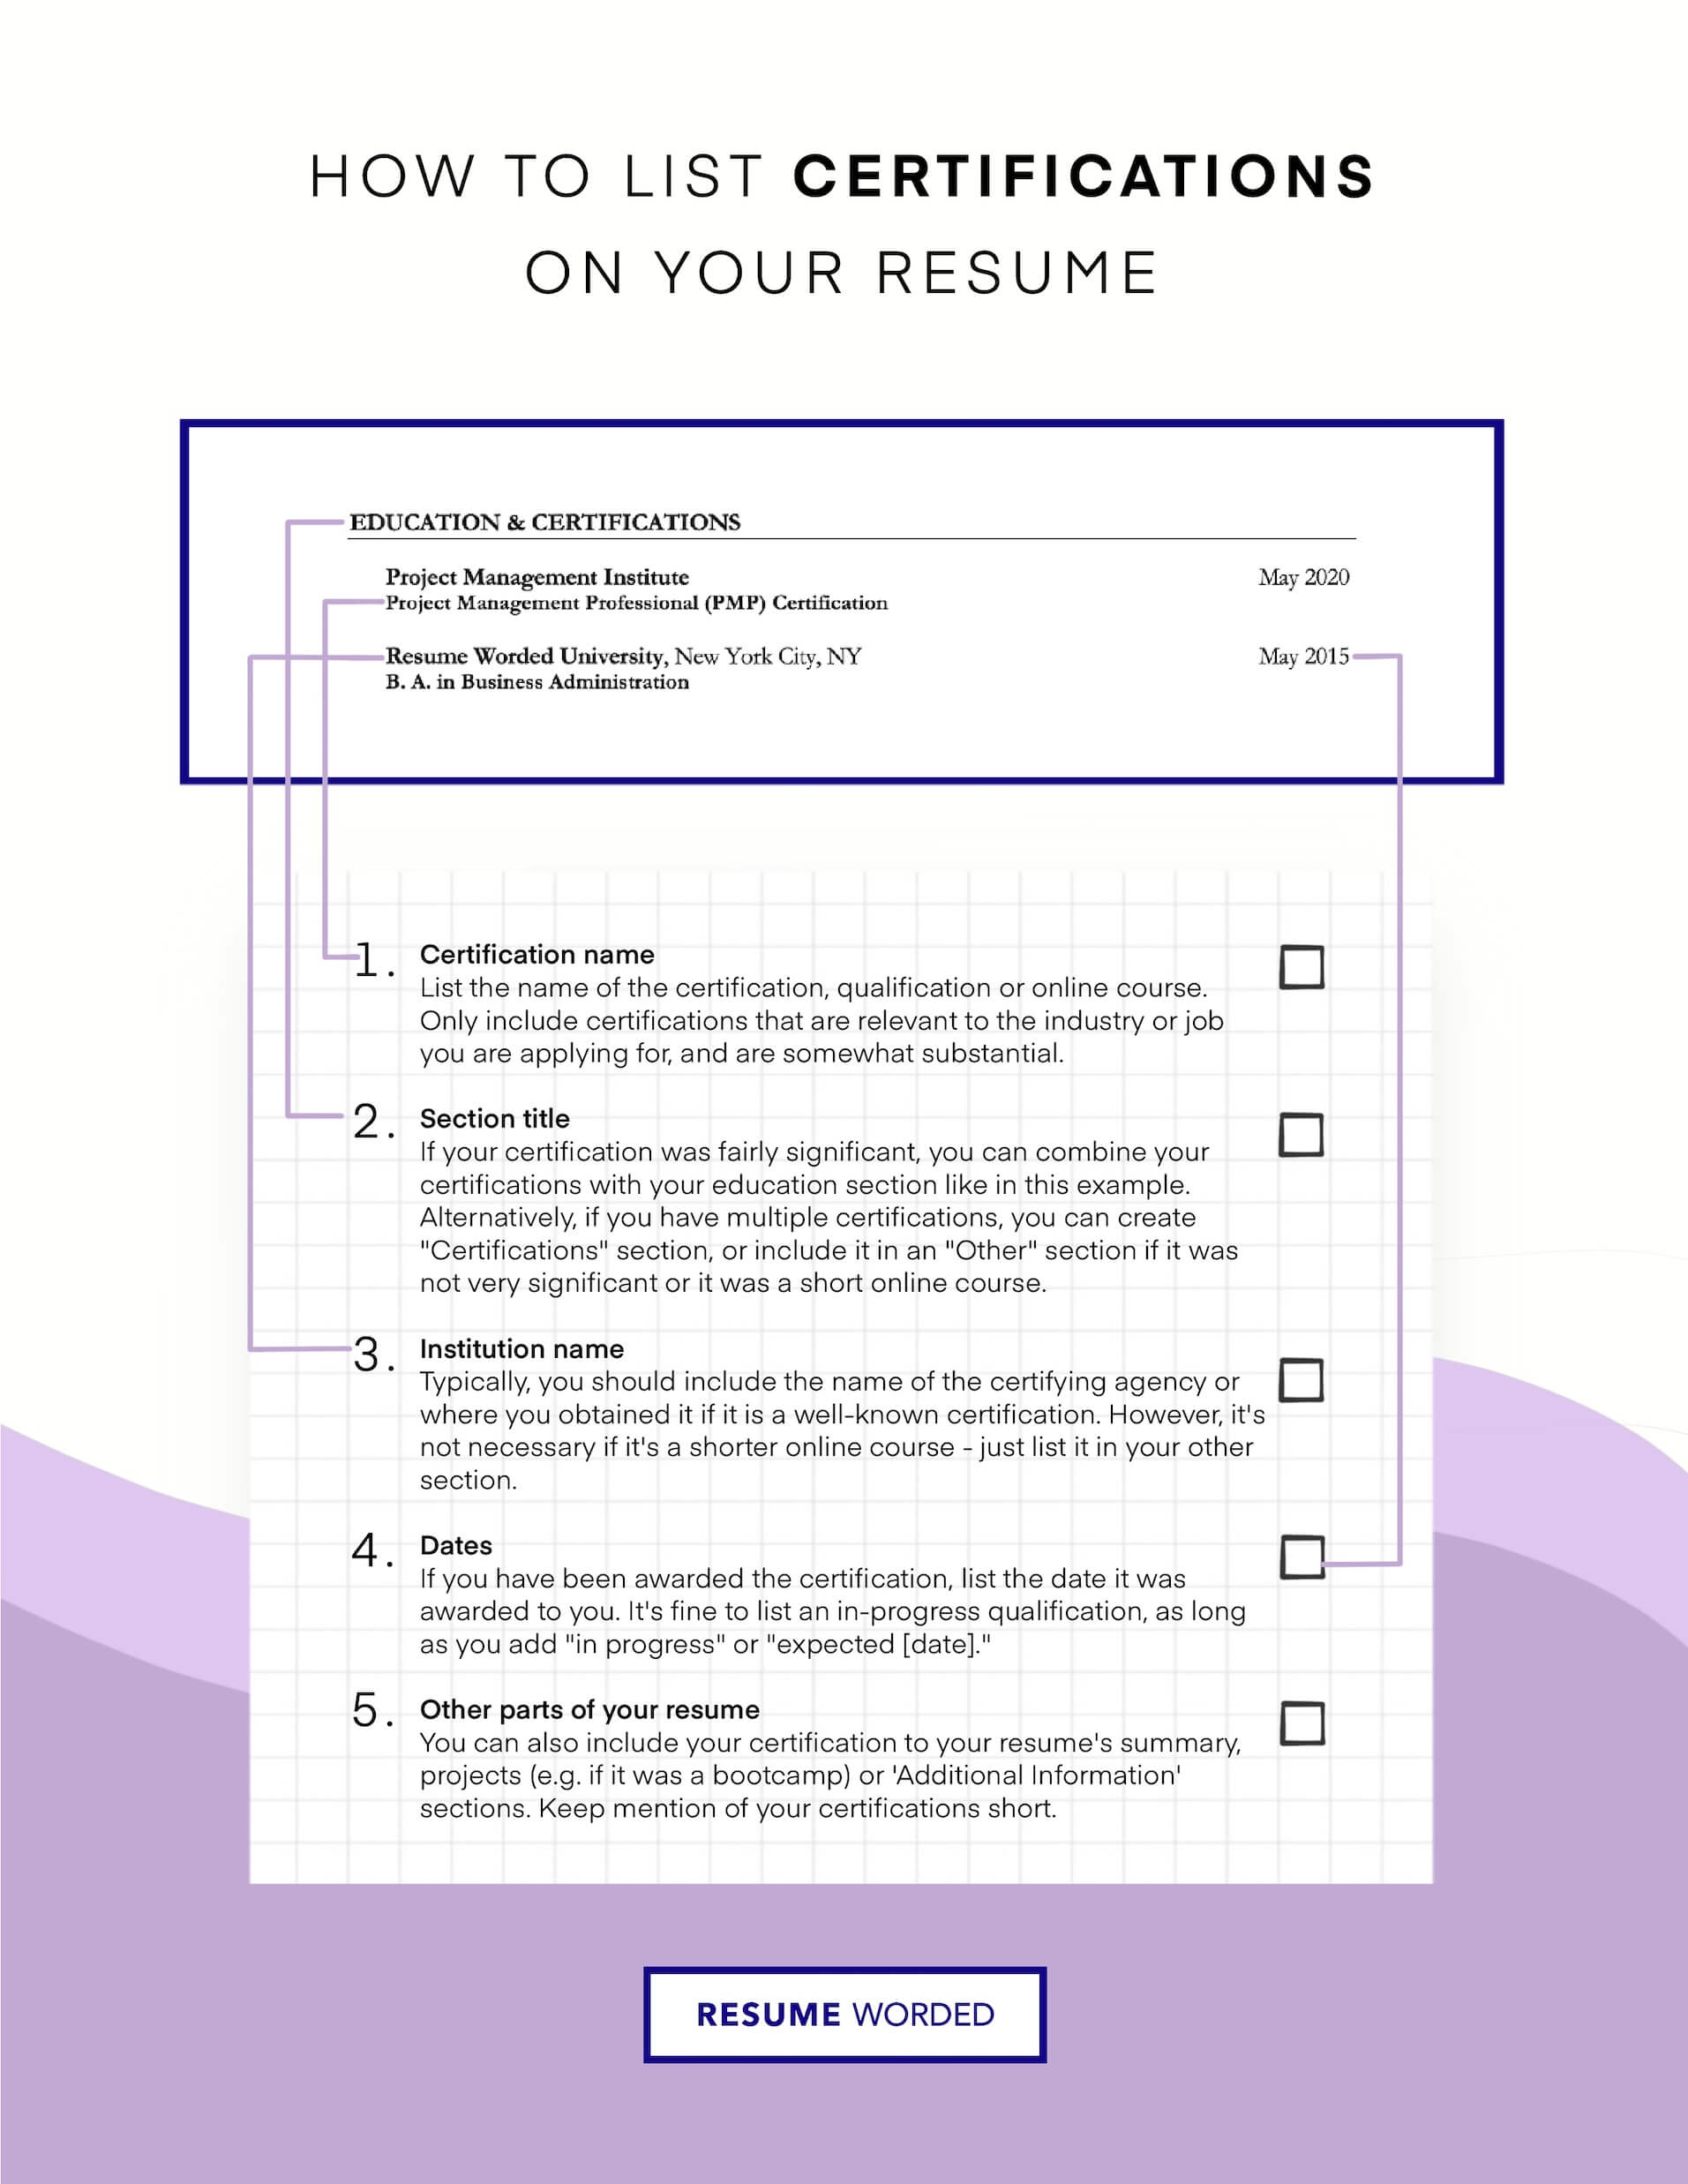 Include relevant certifications - Cyber Security Manager  CV